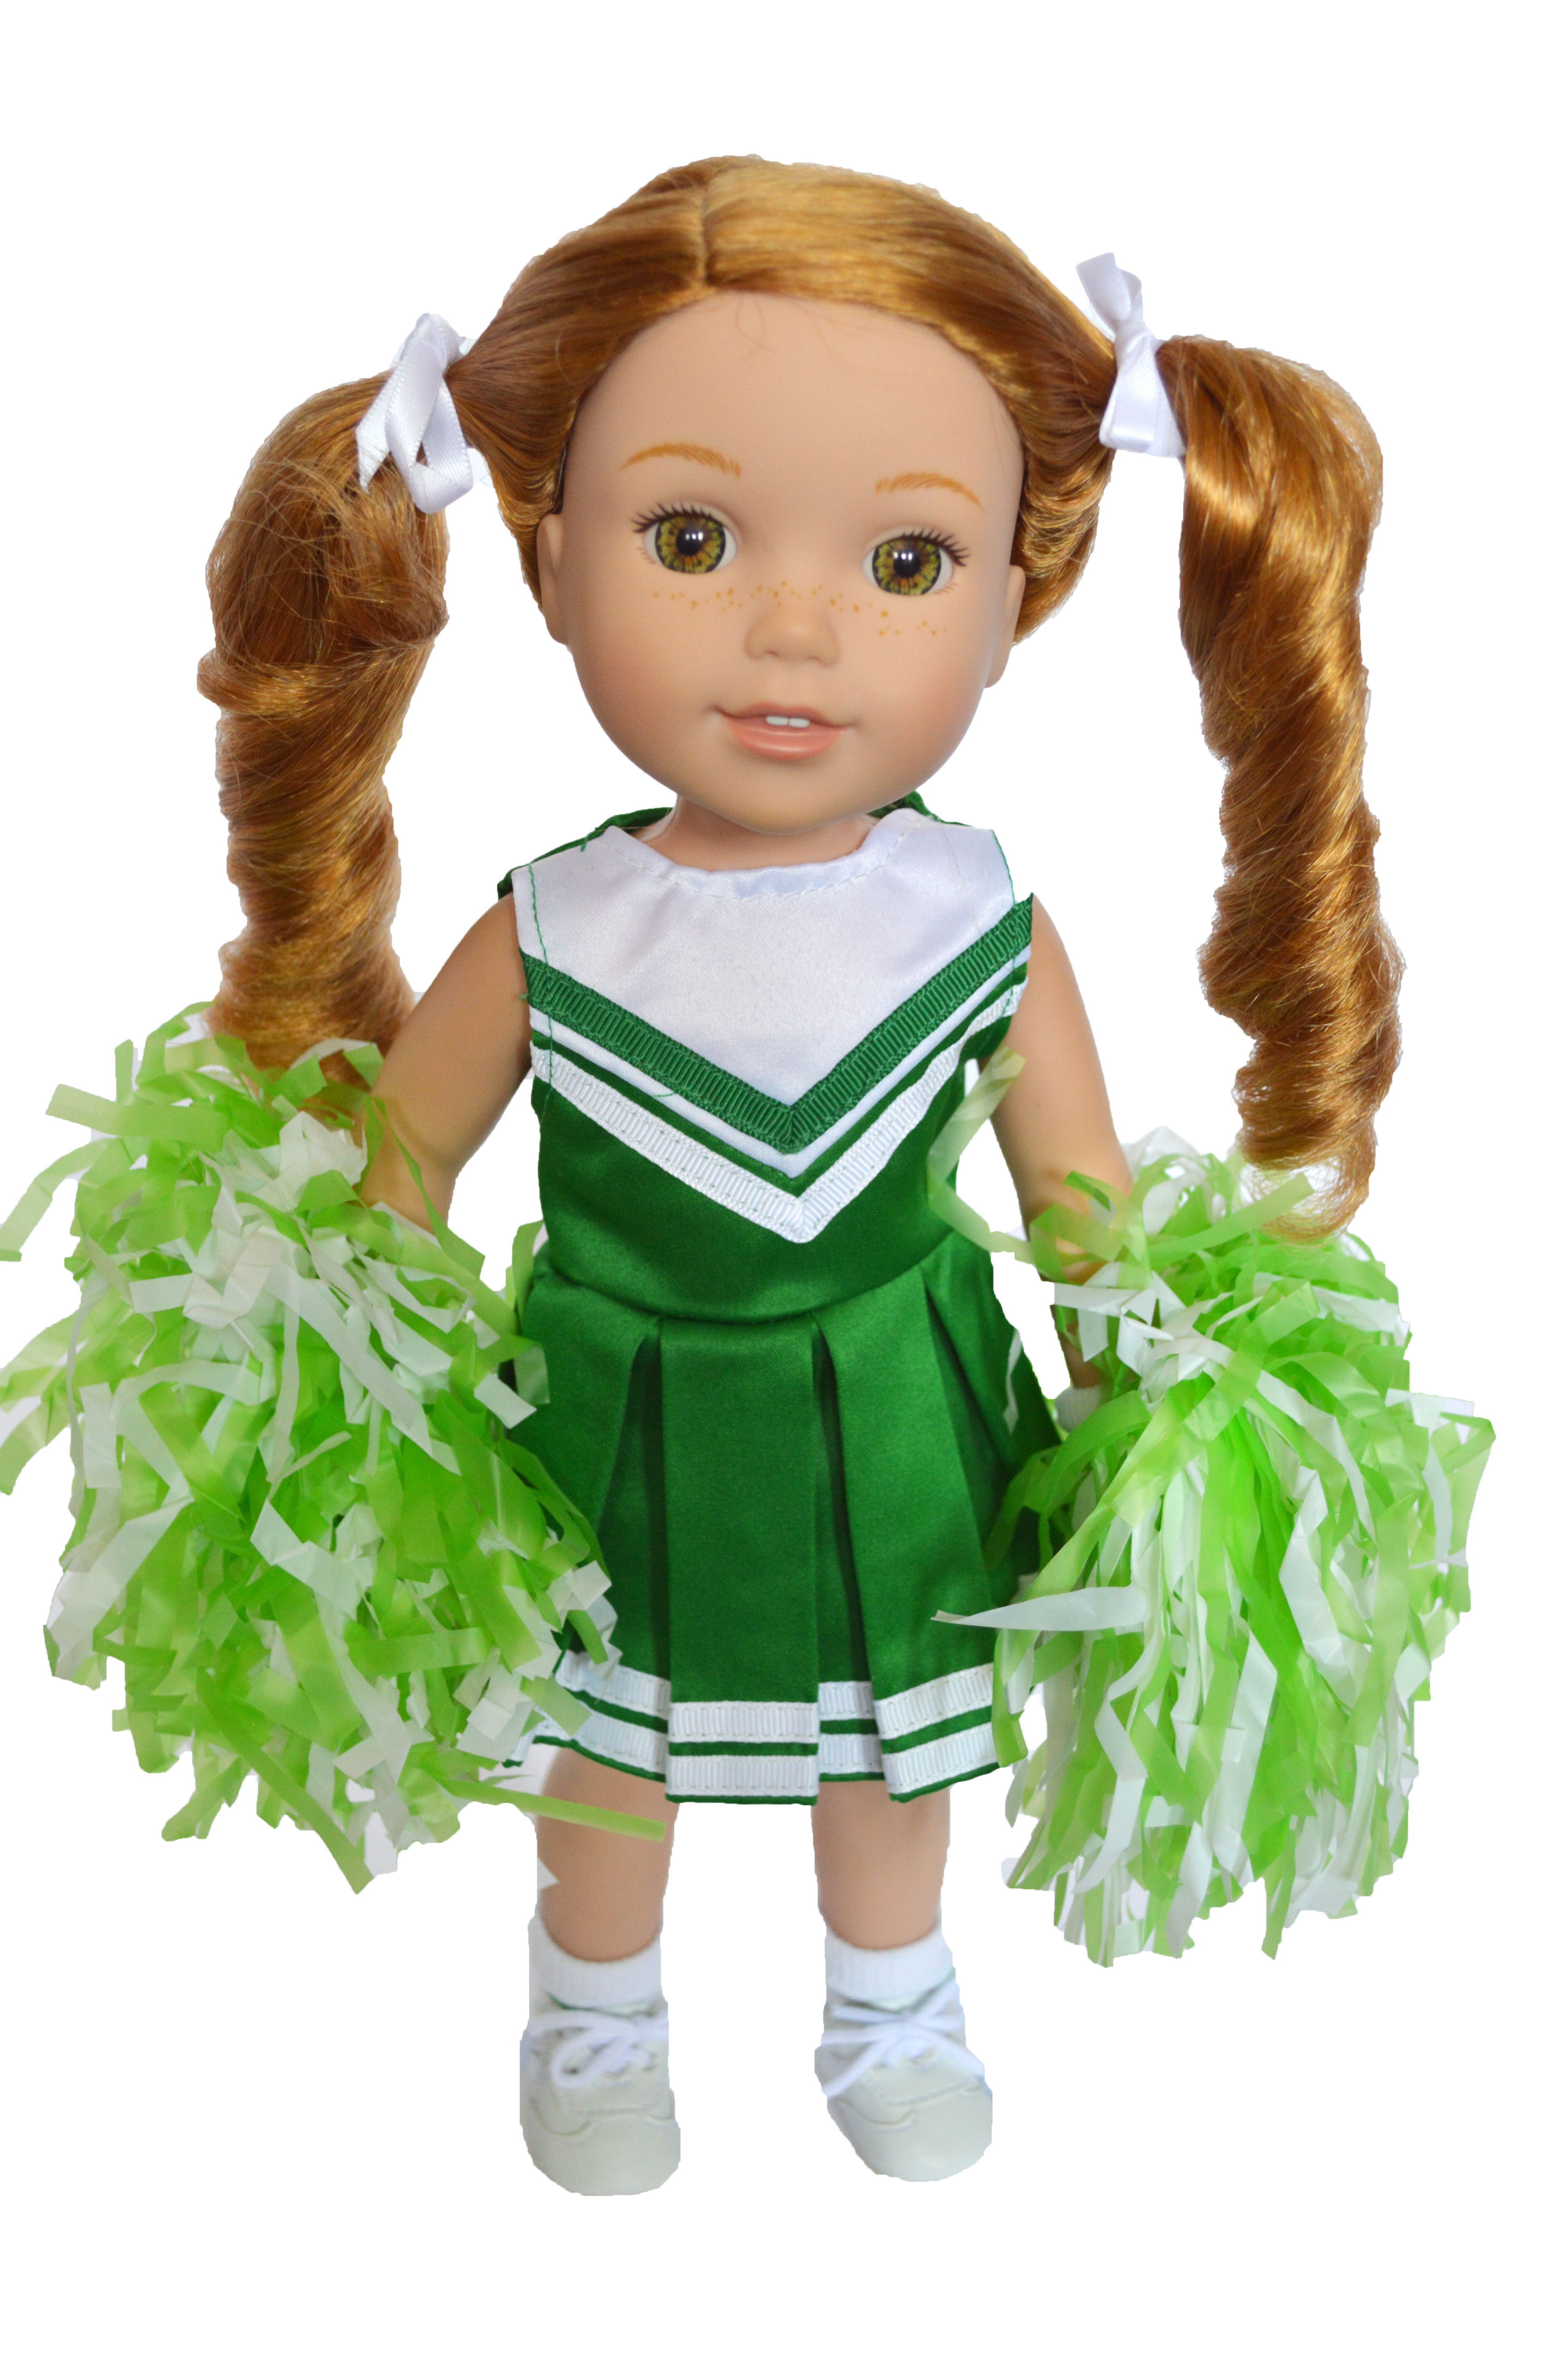 Green and White Cheerleader Outfit for Wellie Wisher Dolls- Includes Socks